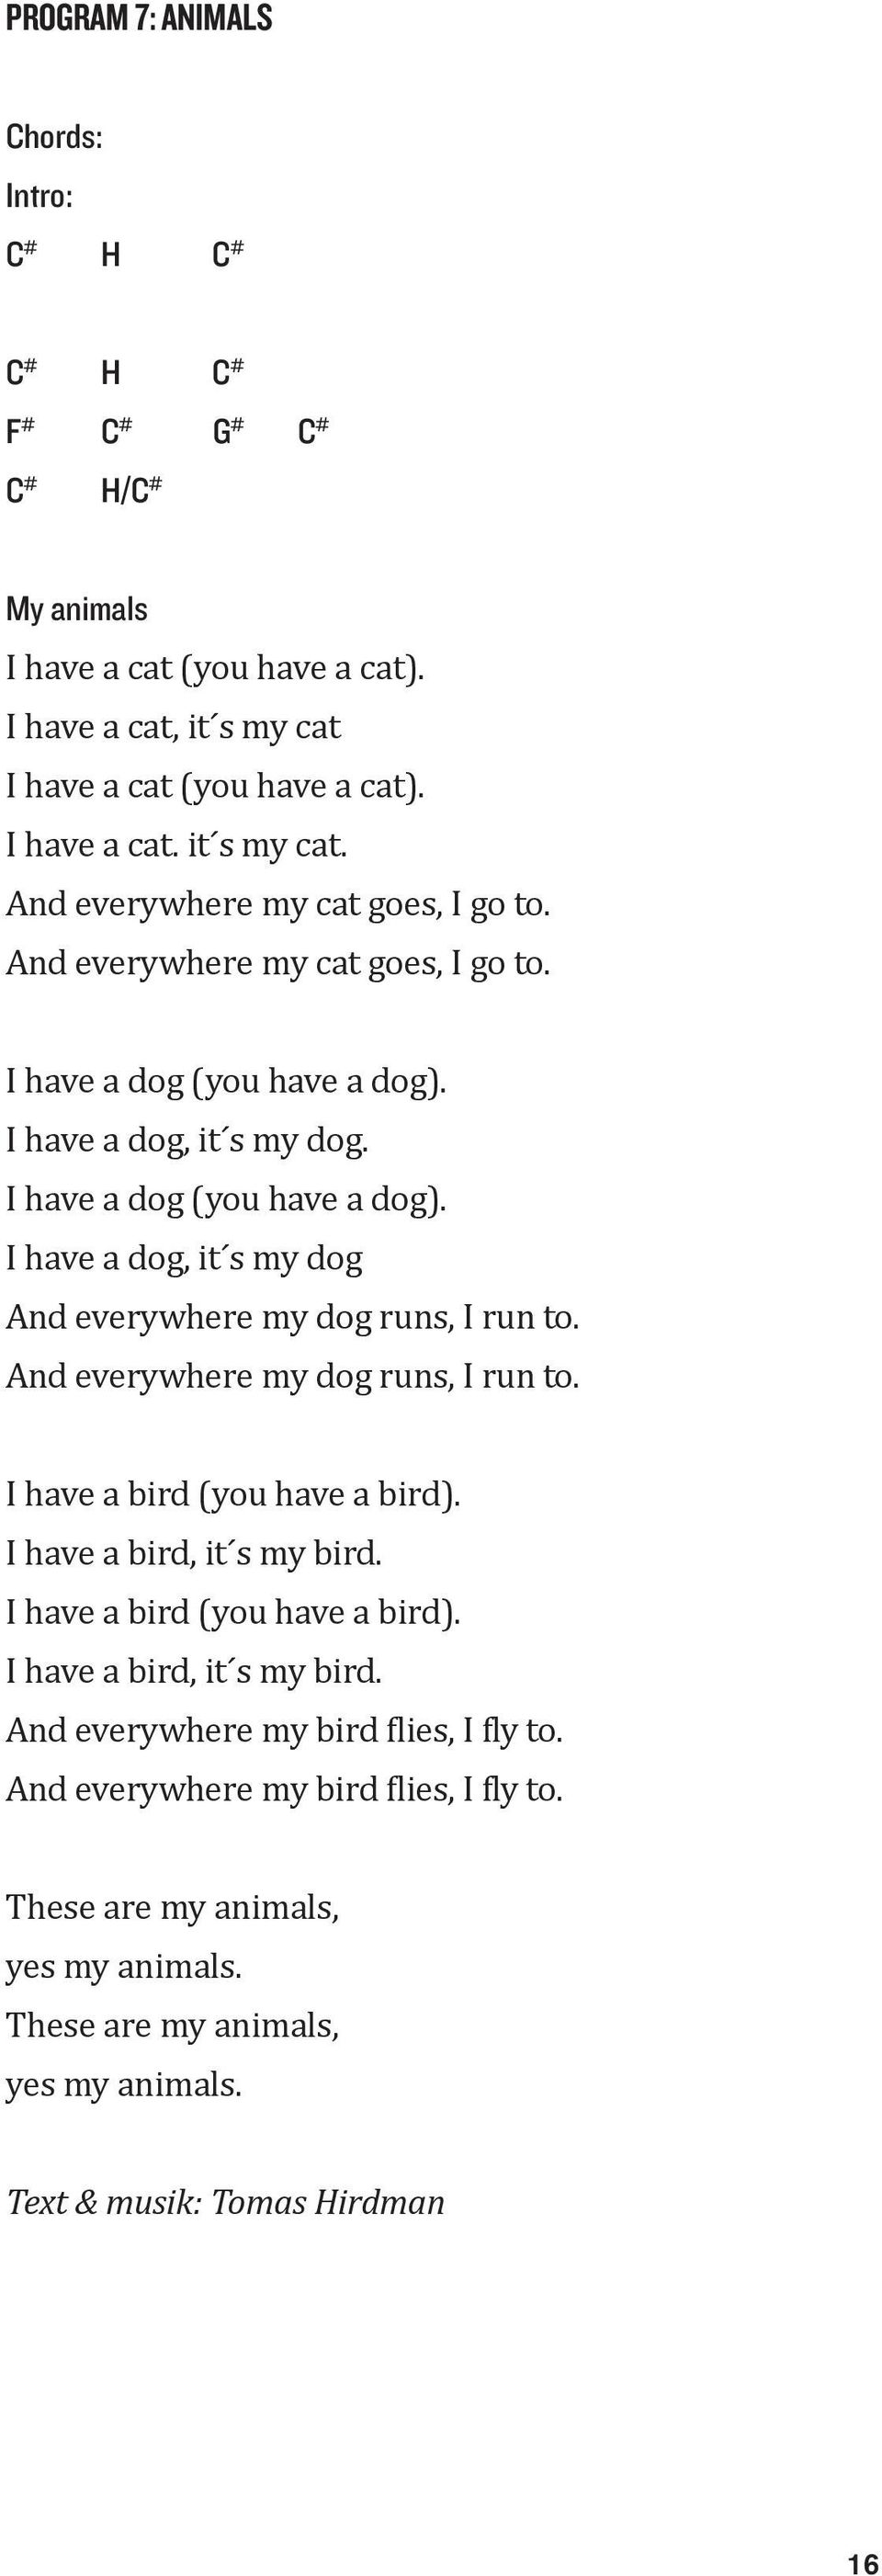 And everywhere my dog runs, I run to. I have a bird (you have a bird). I have a bird, it s my bird. I have a bird (you have a bird). I have a bird, it s my bird. And everywhere my bird flies, I fly to.